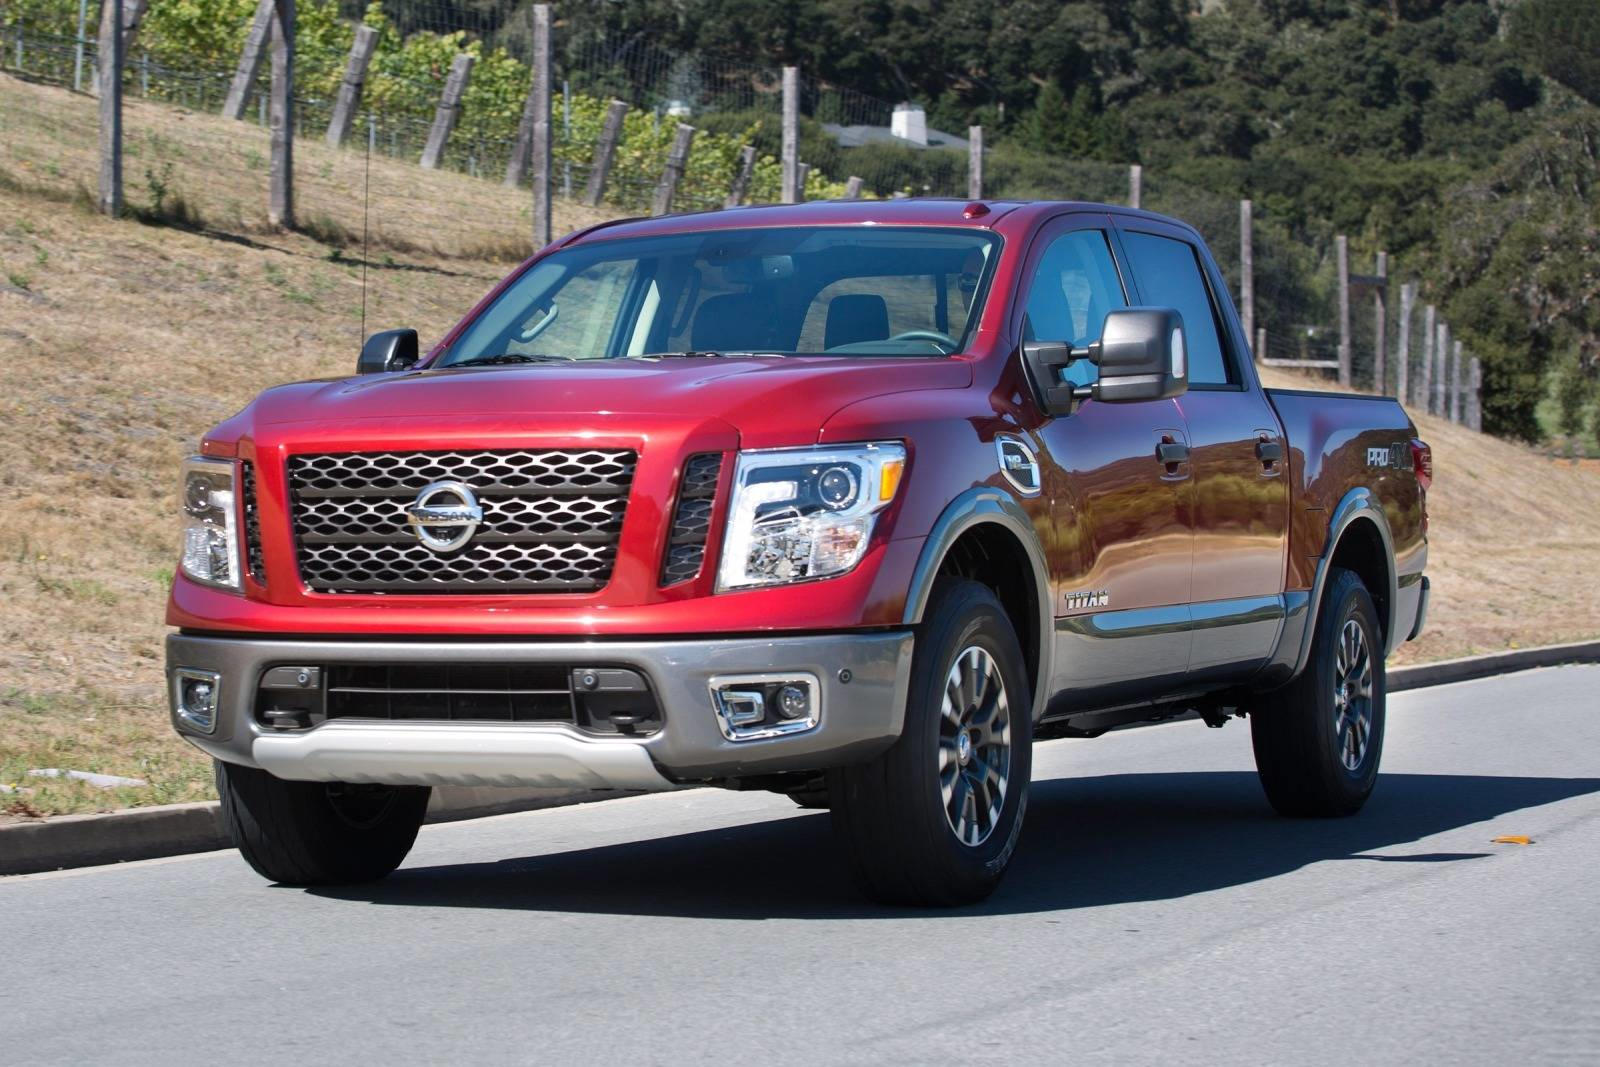 2018 Nissan Titan Front View Driving